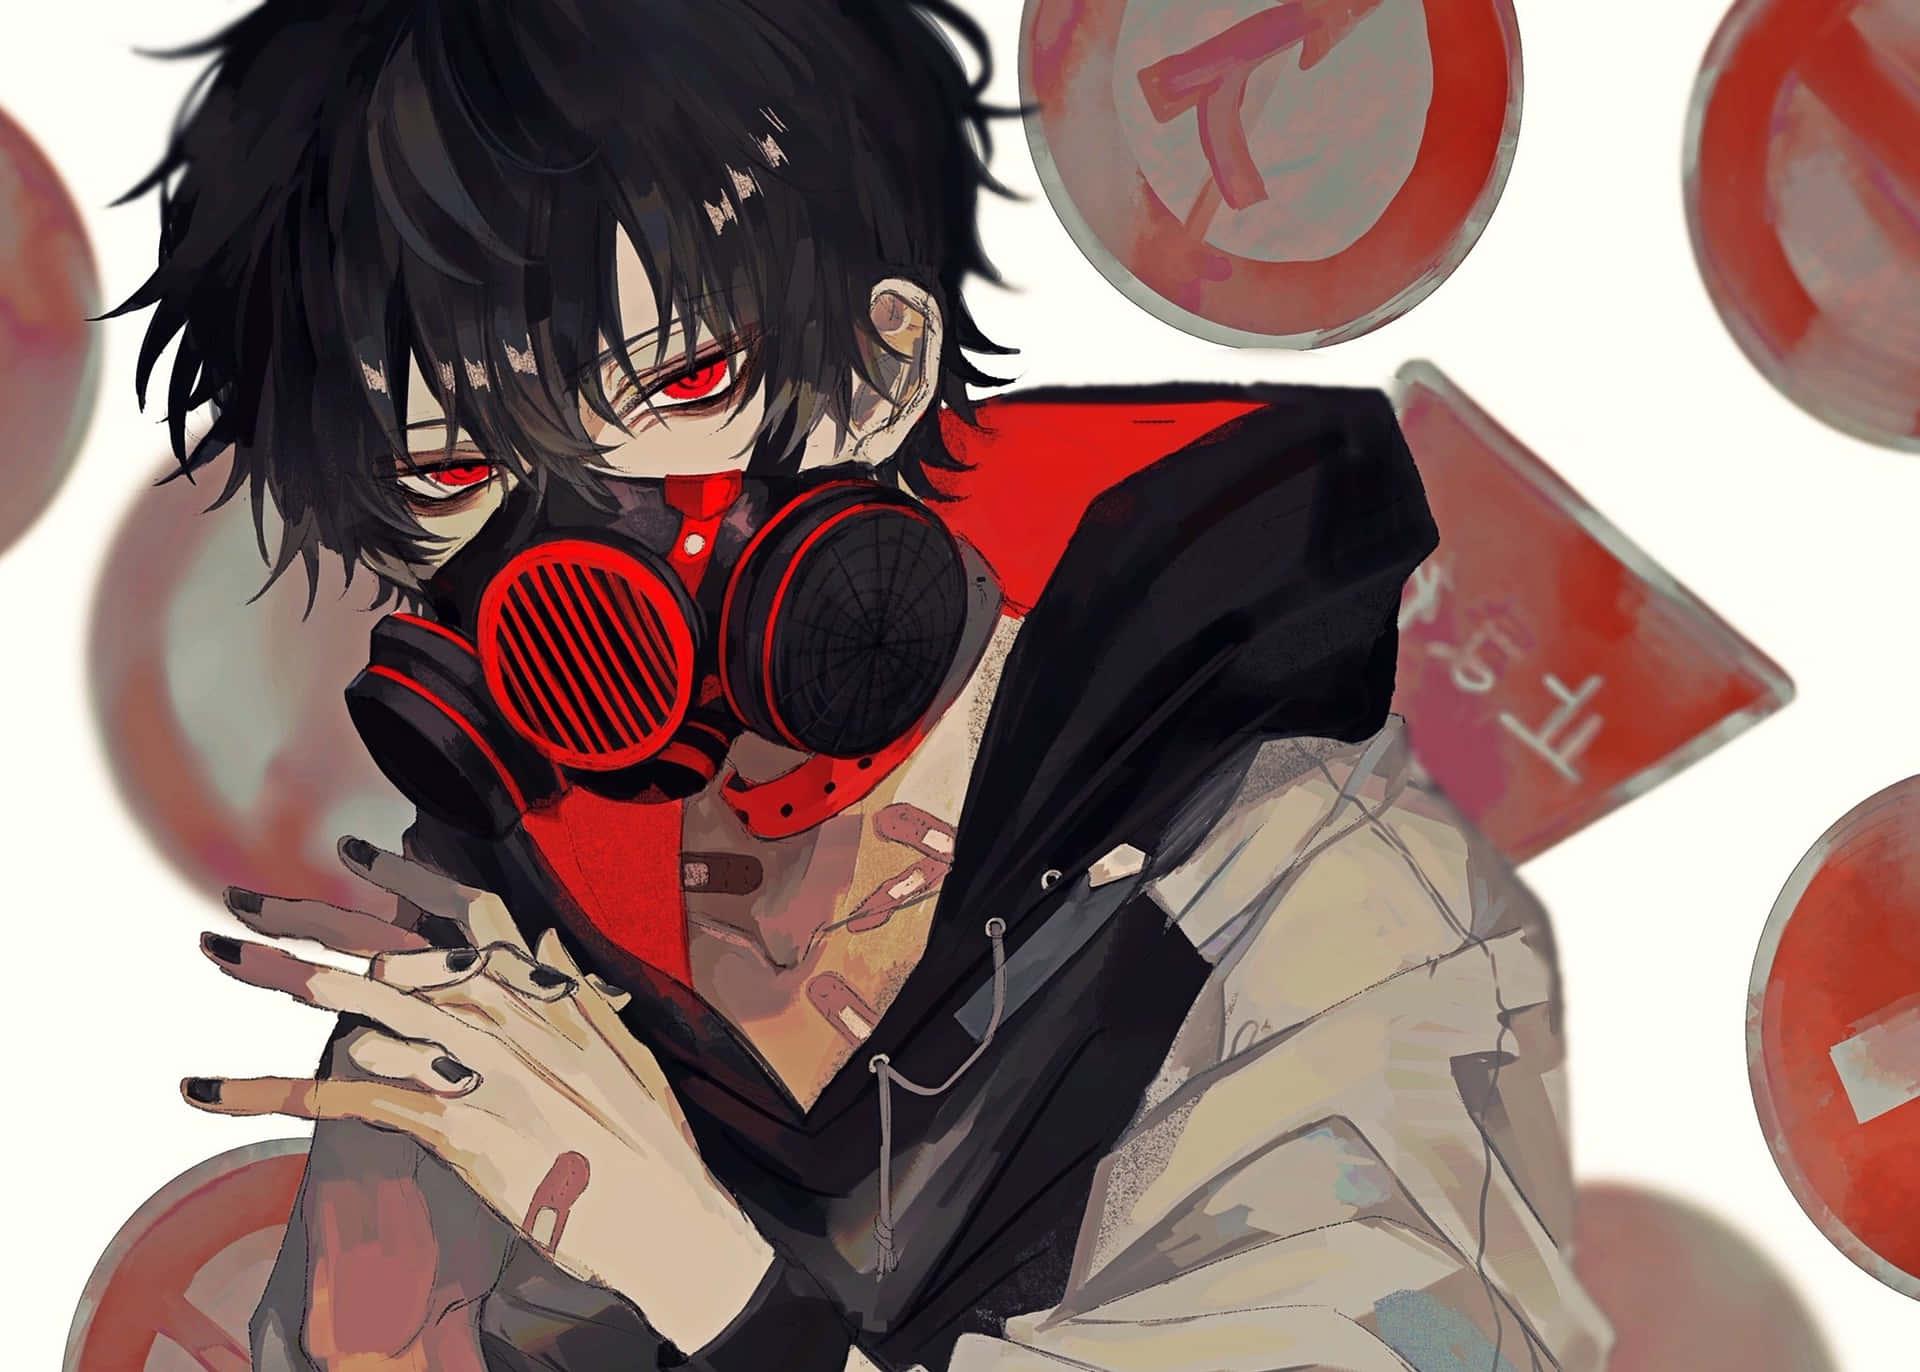  Anime Boy With Mask Wallpapers